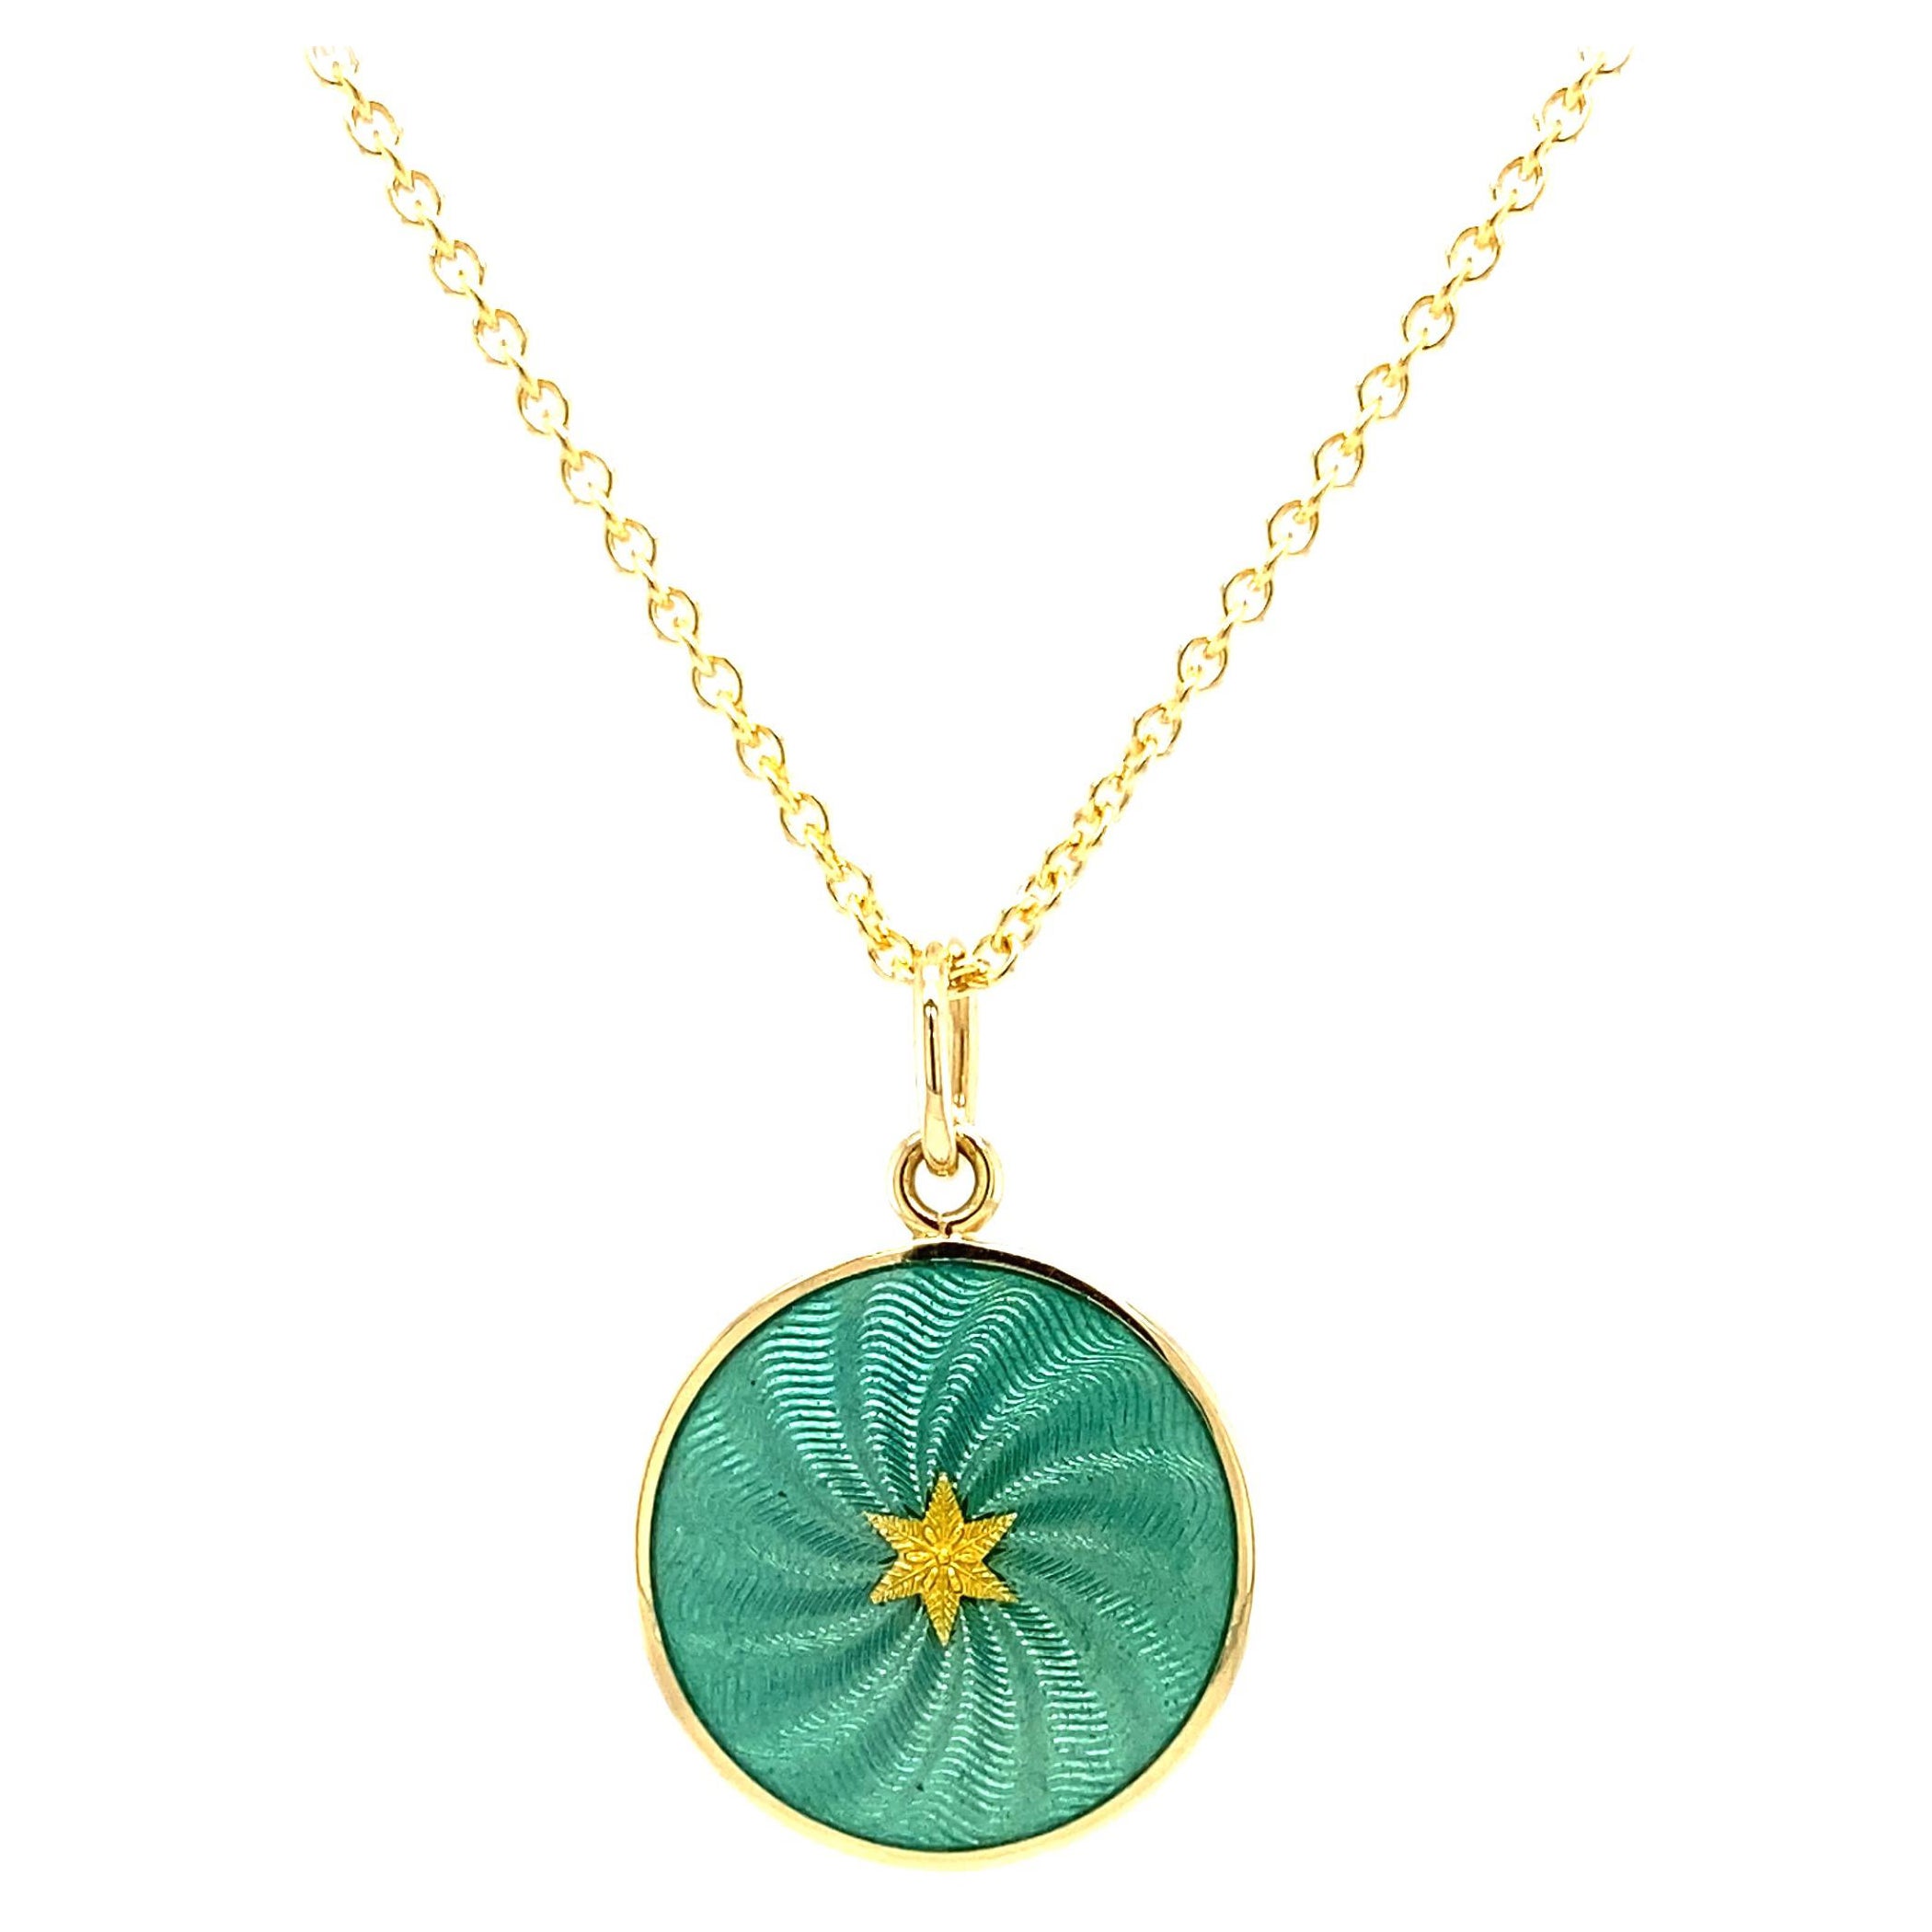 Round Disk Pendant Necklace 18k Yellow Gold Turquoise Enamel Guilloche Paillons